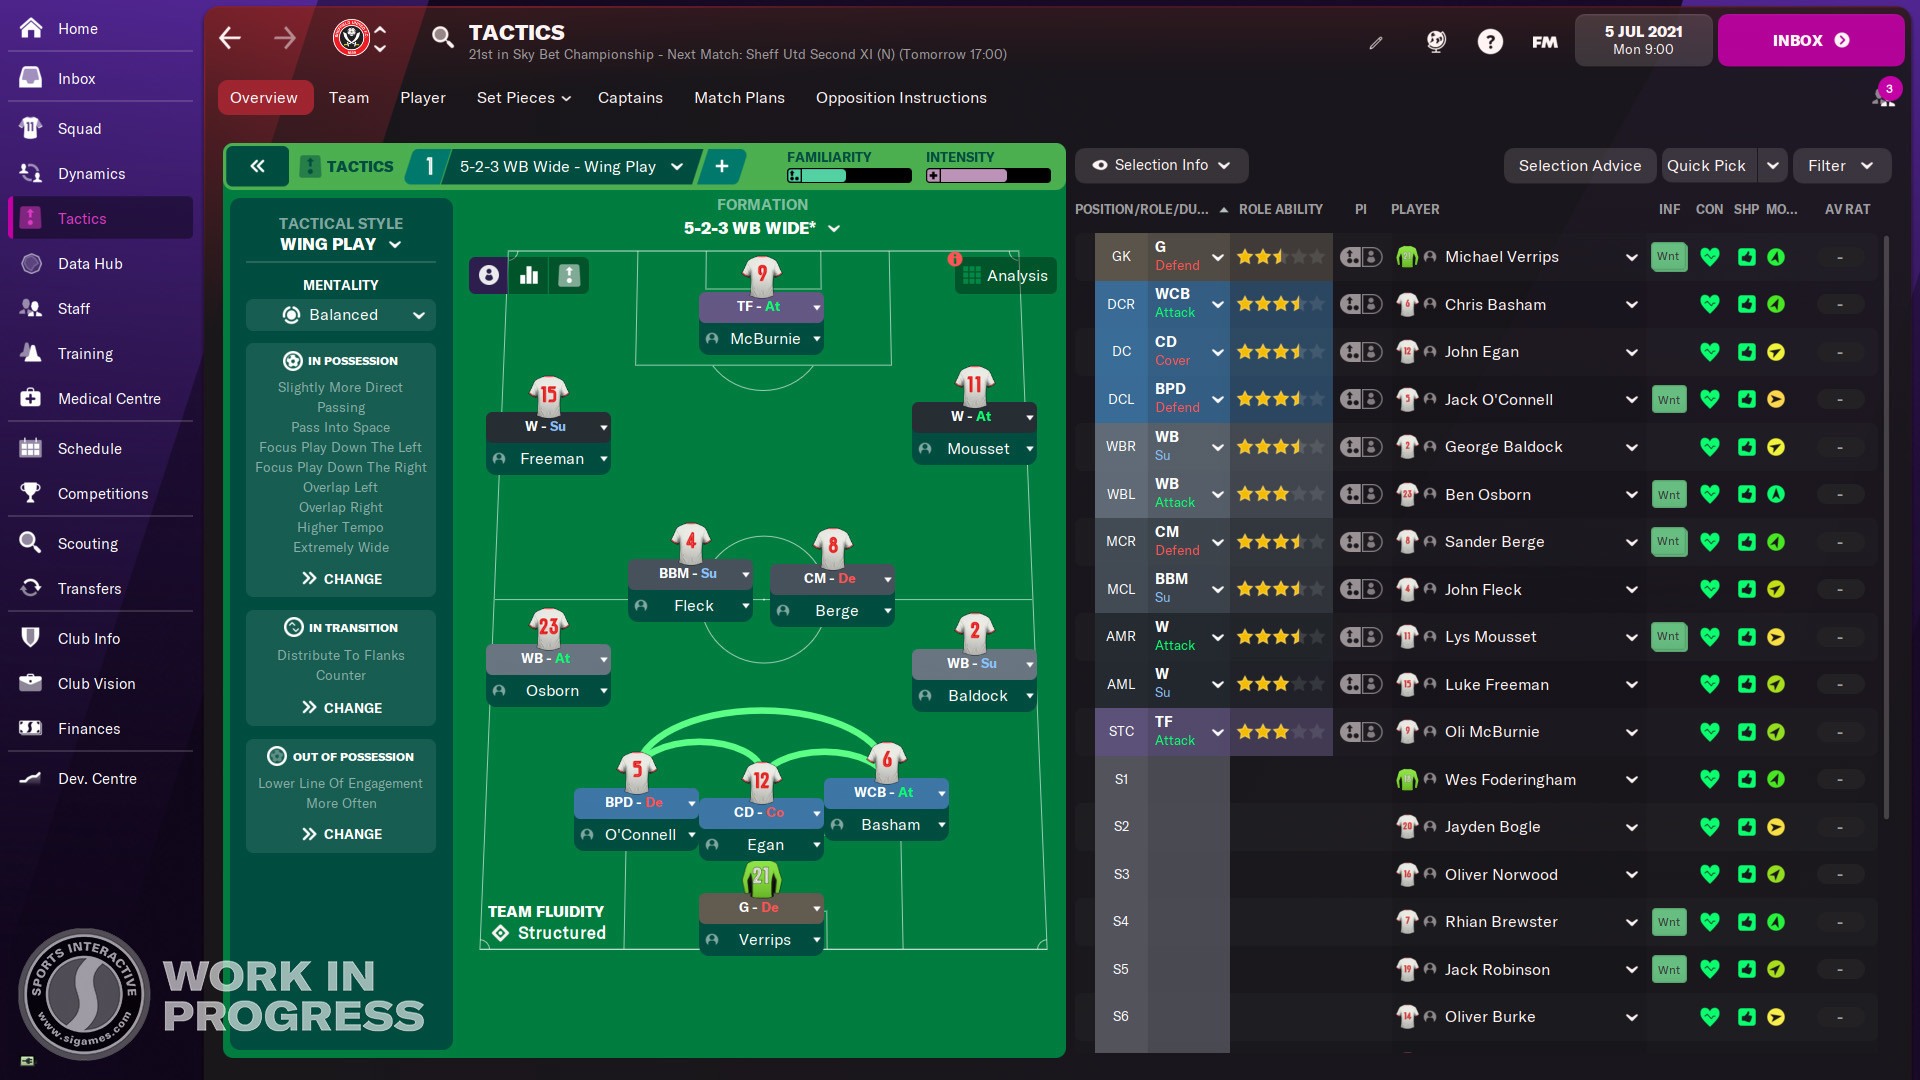 Football Manager 2022 Torrent Download PC Game - SKIDROW TORRENTS